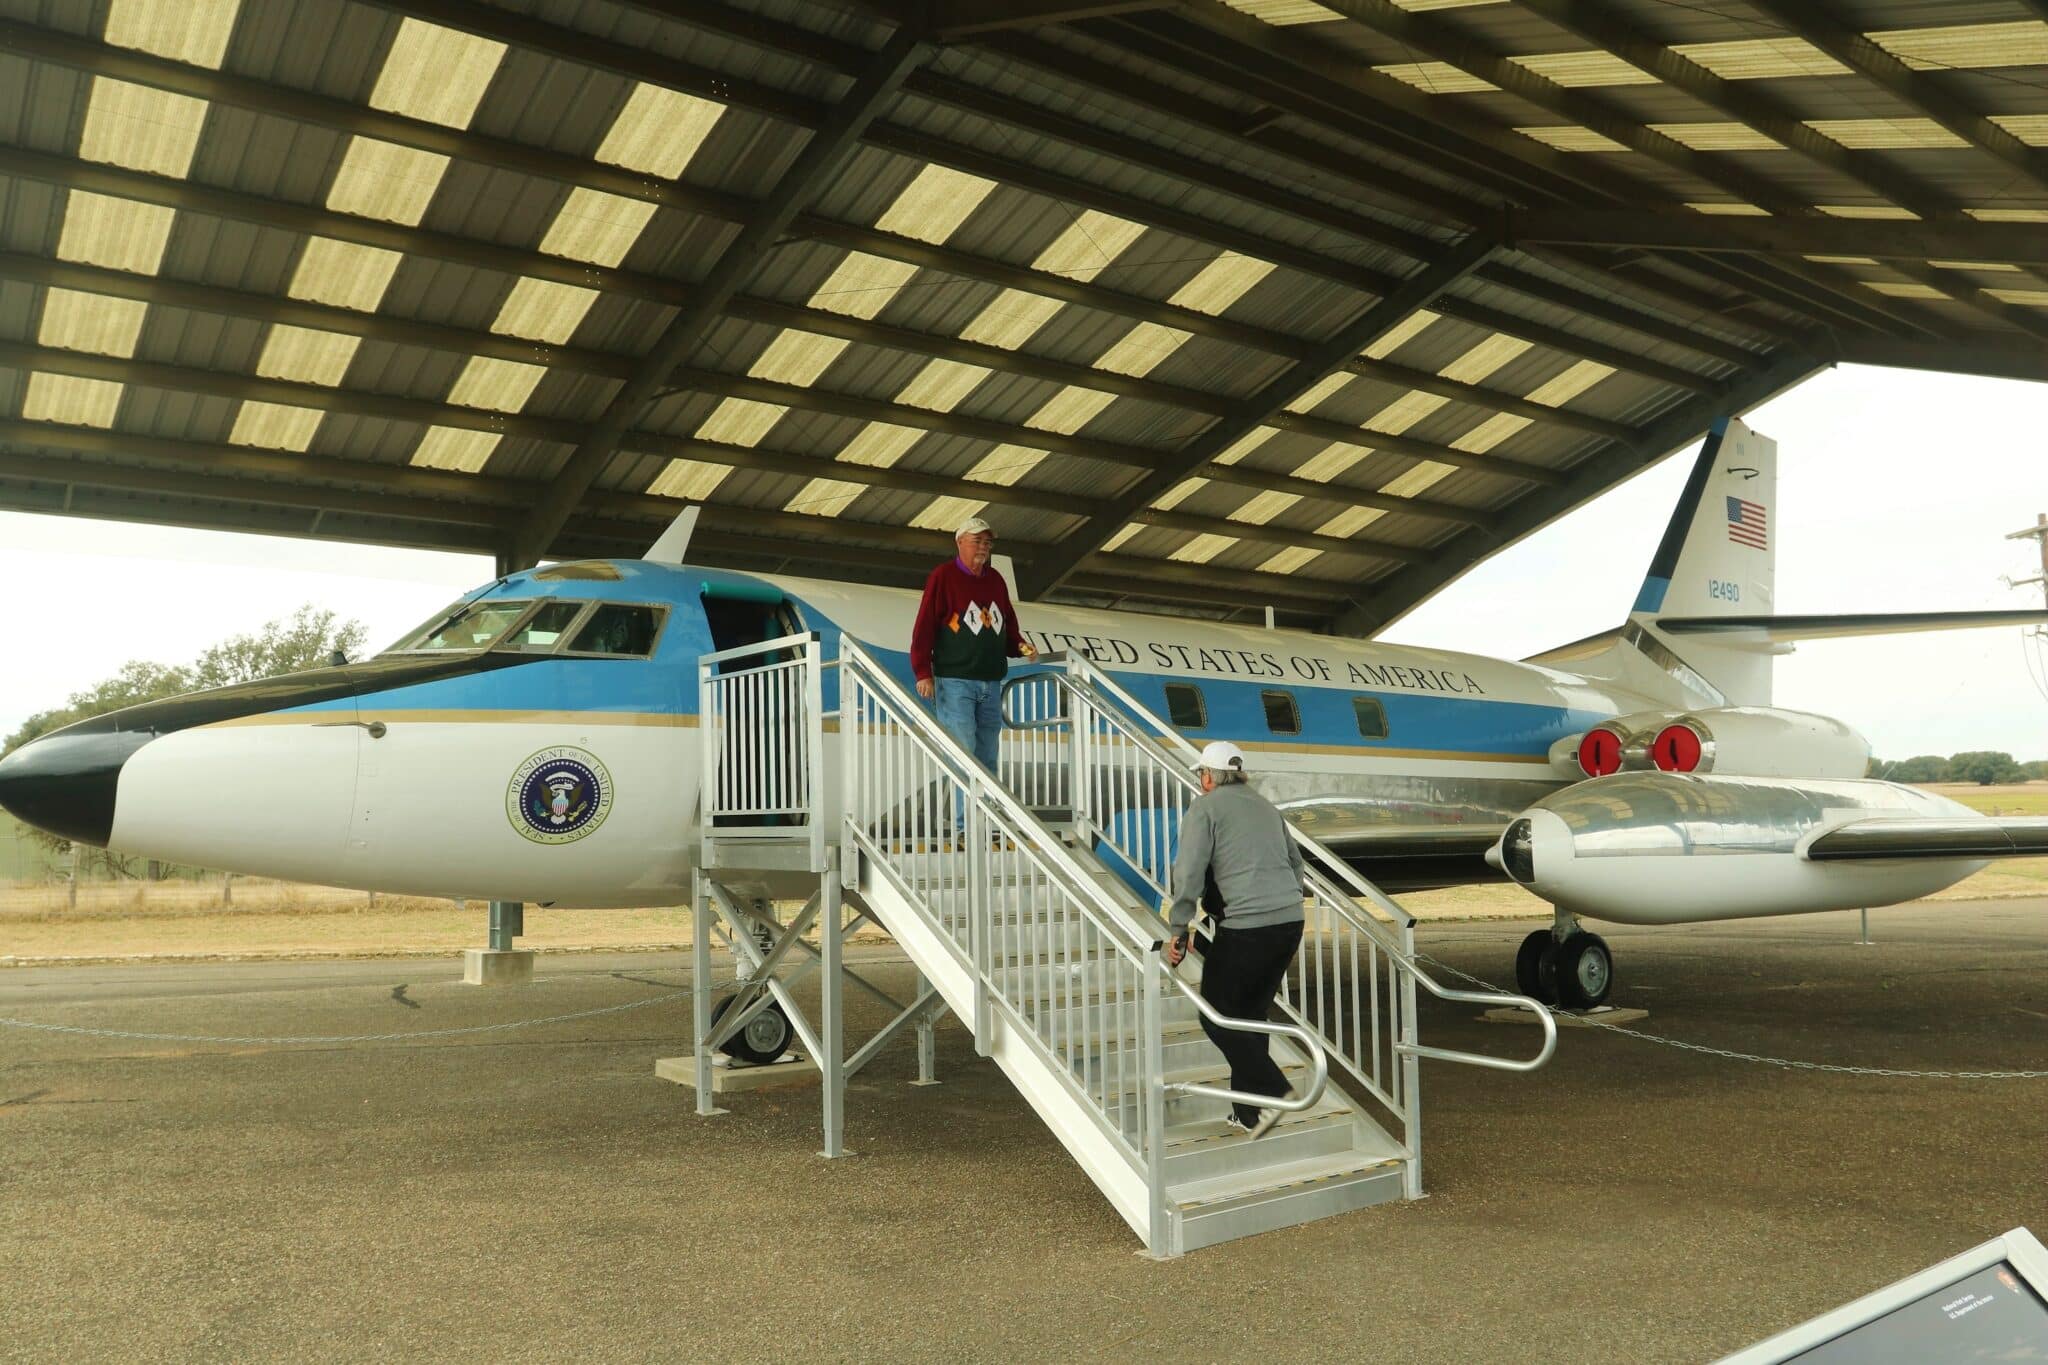 Lockheed Jetstar, one of five used by LBJ on visits to his Texas ranch on the Pedernales